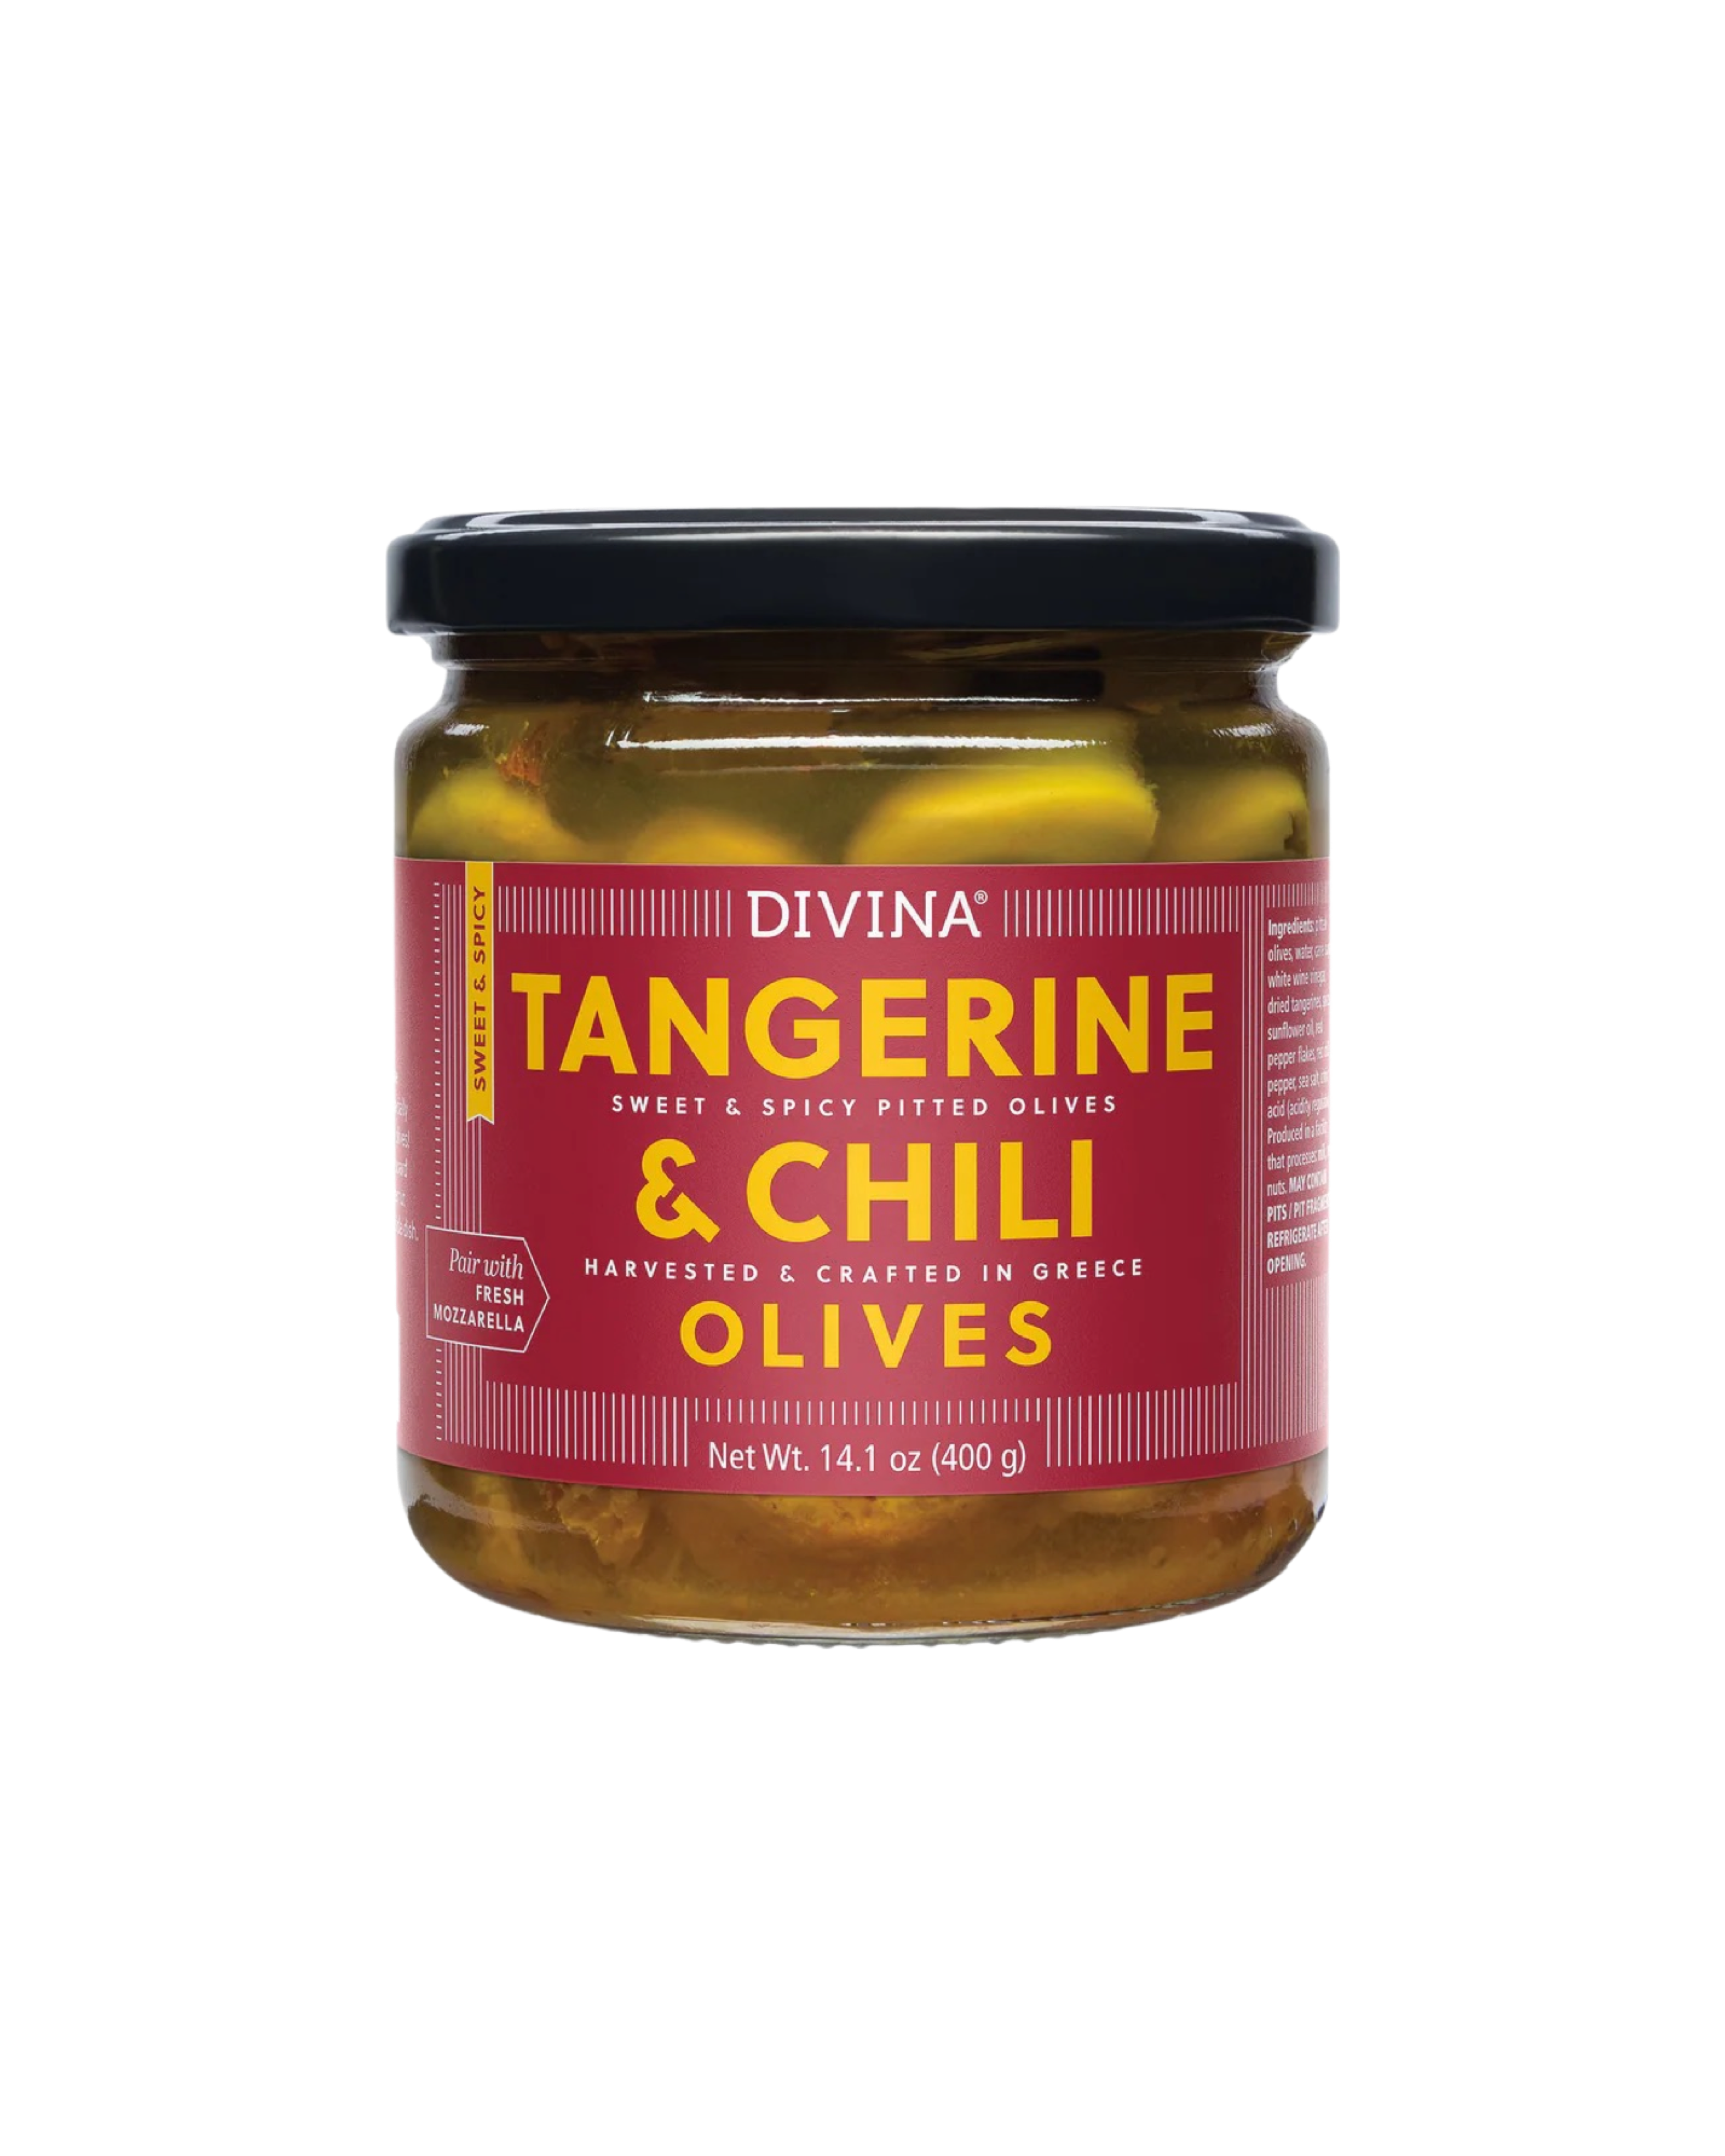 Tangerine And Chili Olives